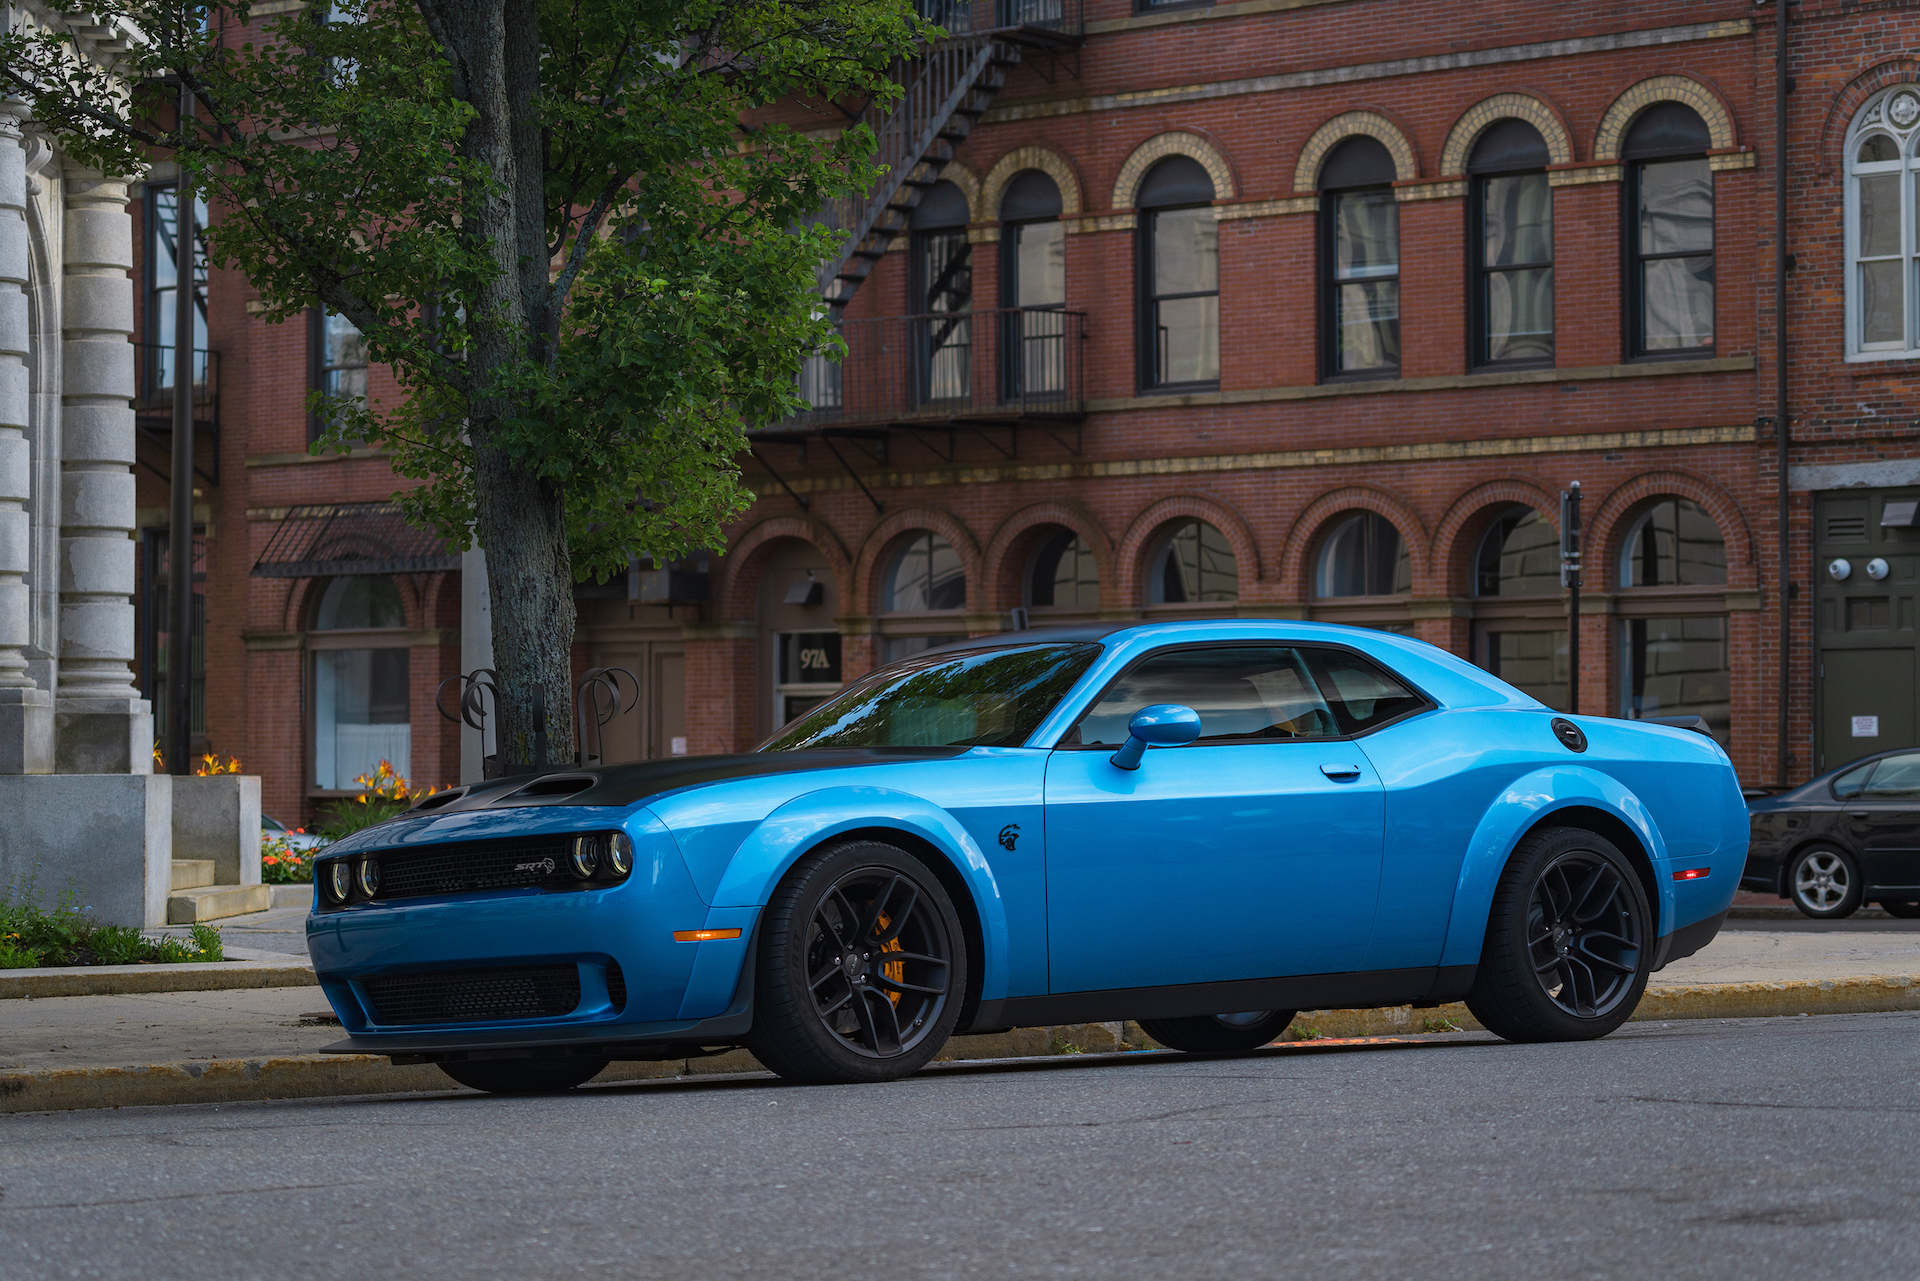 2019 Dodge Challenger prices and expert review - The Car Connection